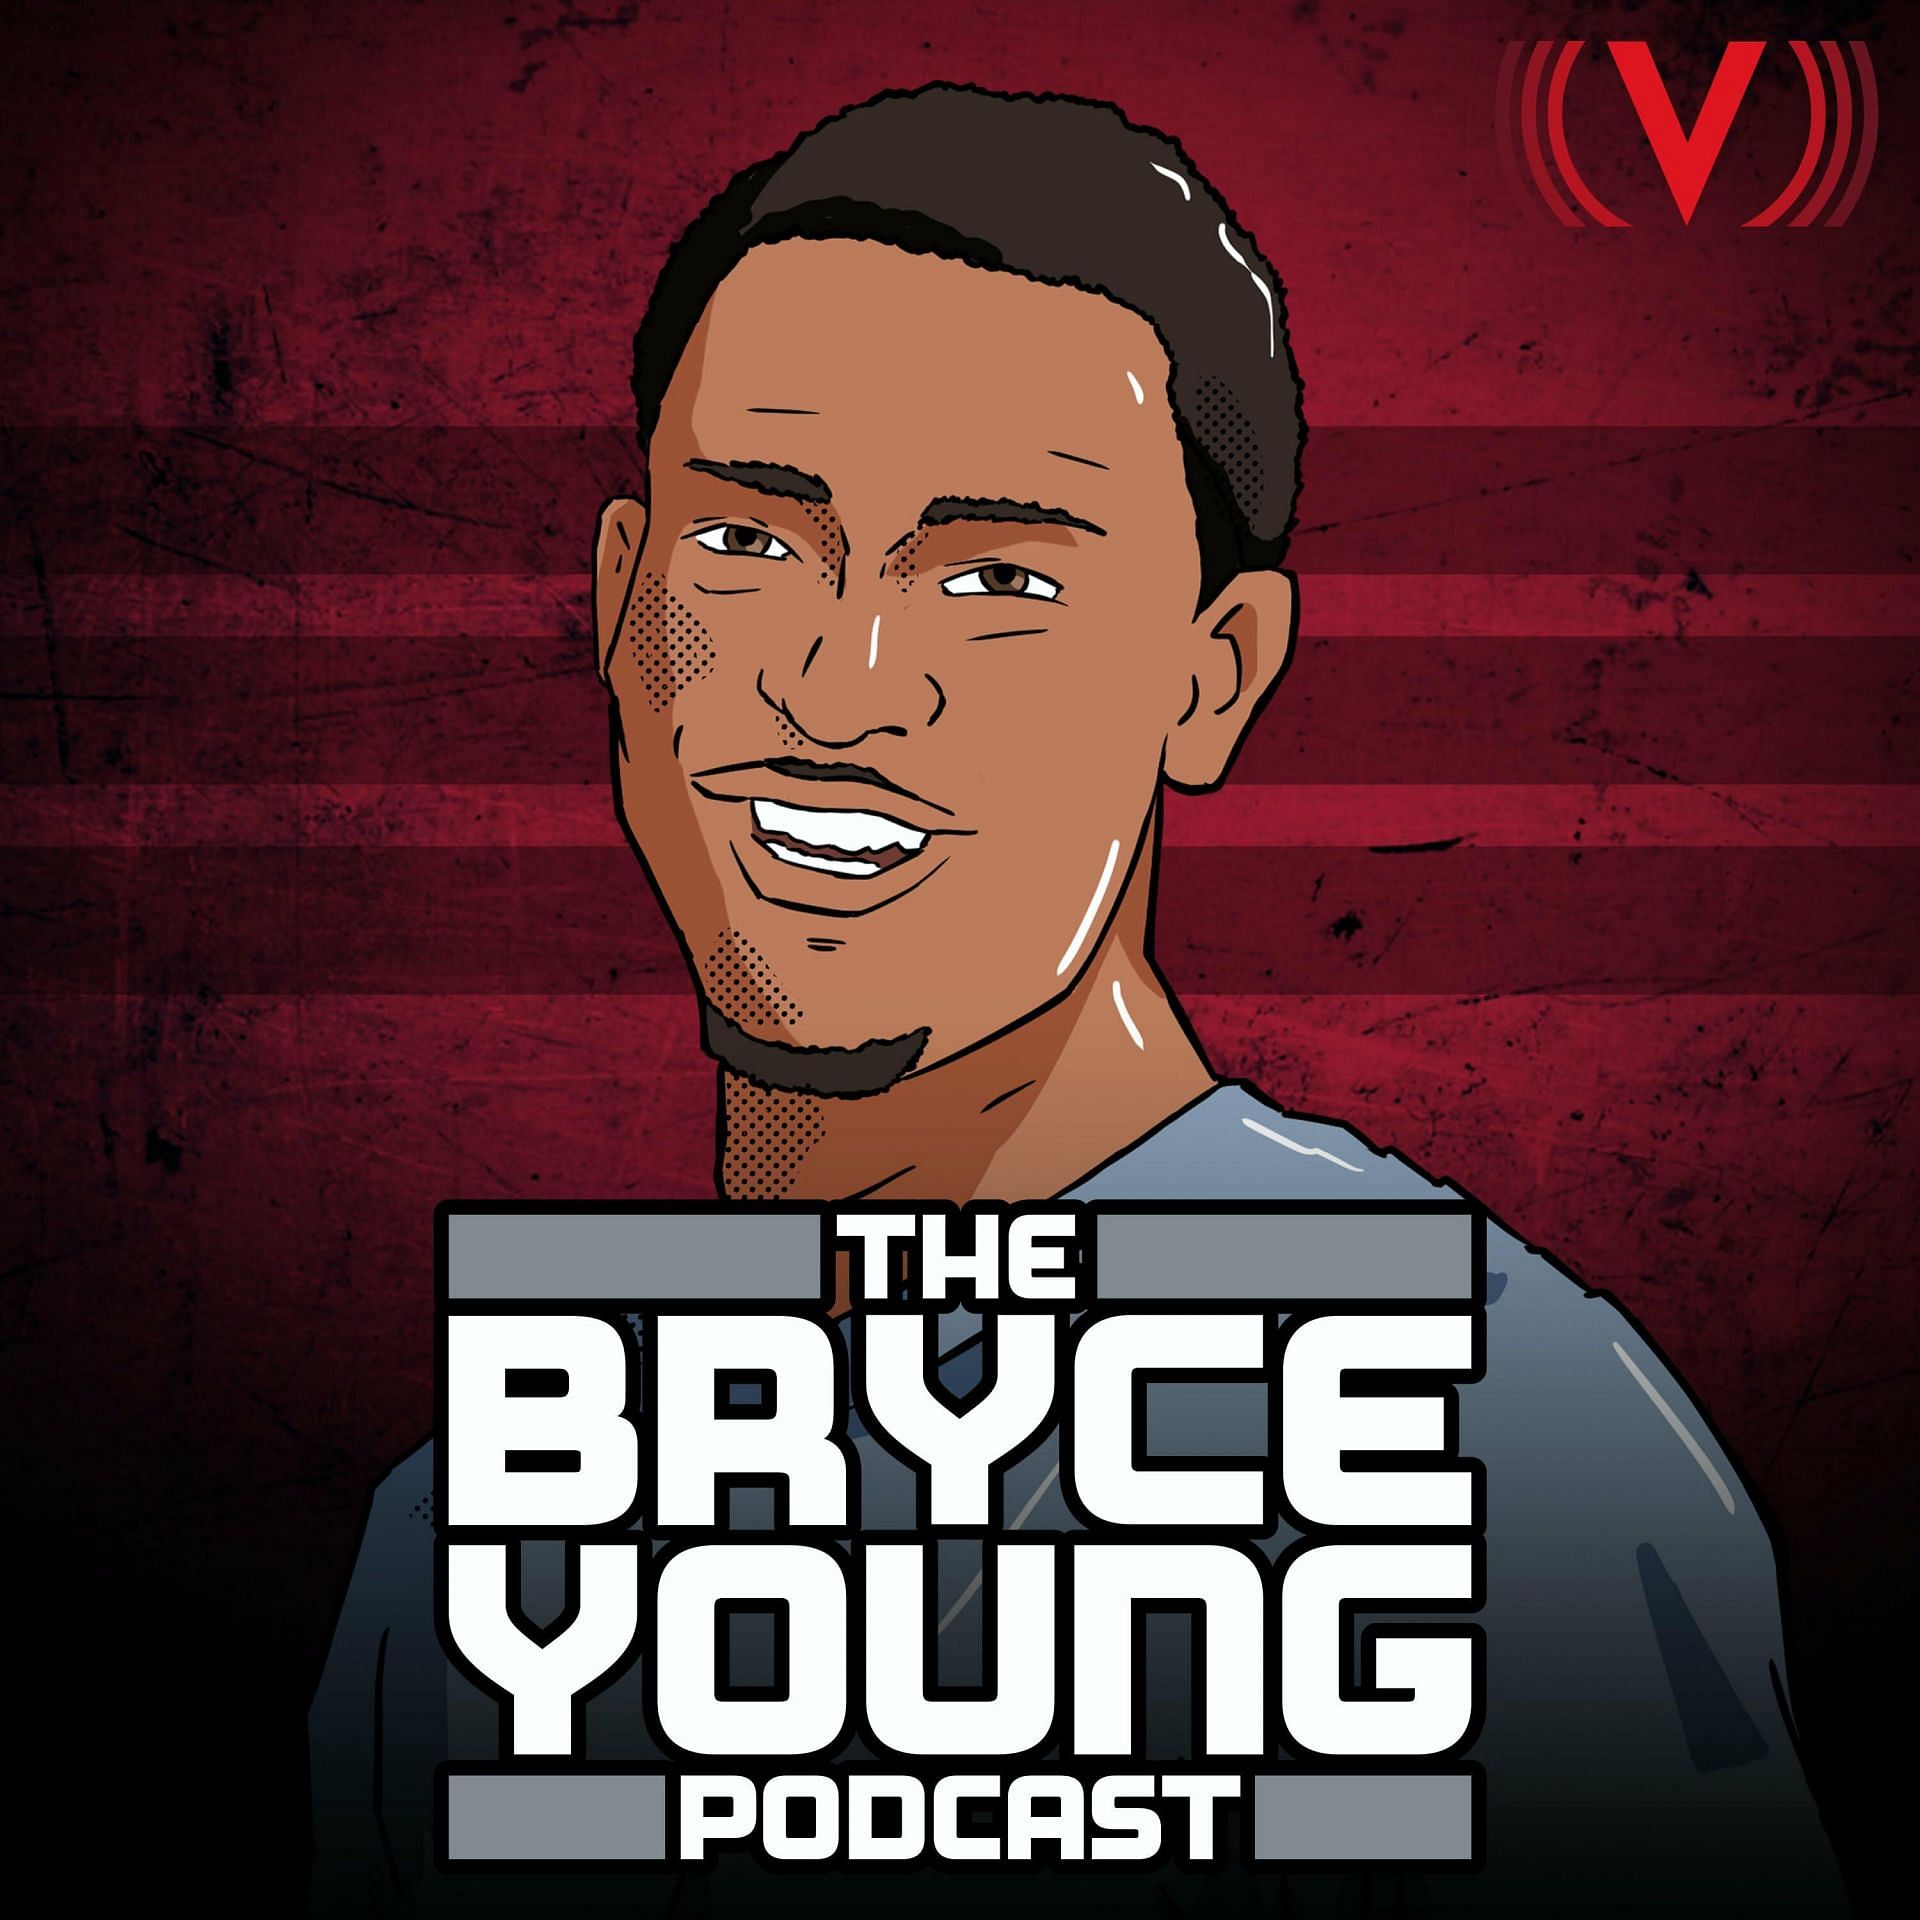 The icon for Bryce Young&#039;s podcast